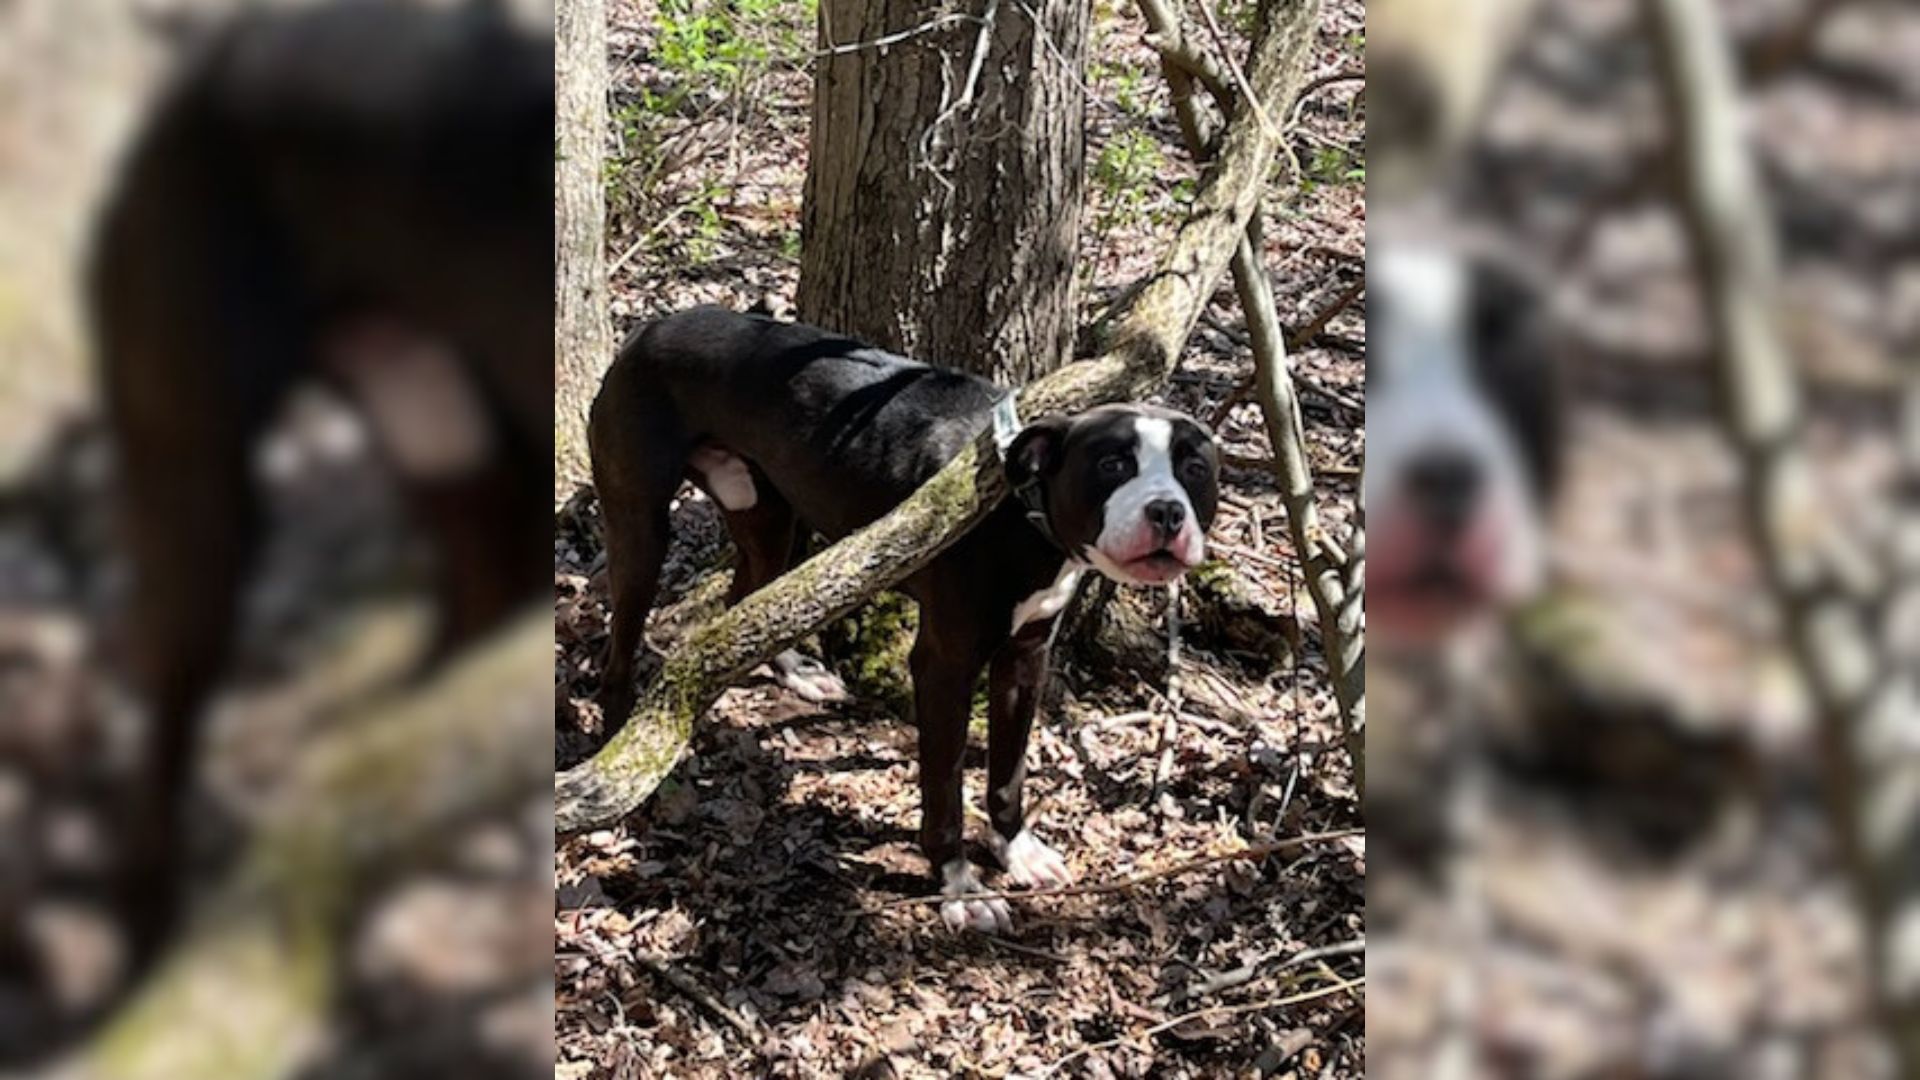 Rescuers Shocked To Find A Dog Strapped To A Tree By His Collar Deep In The Woods